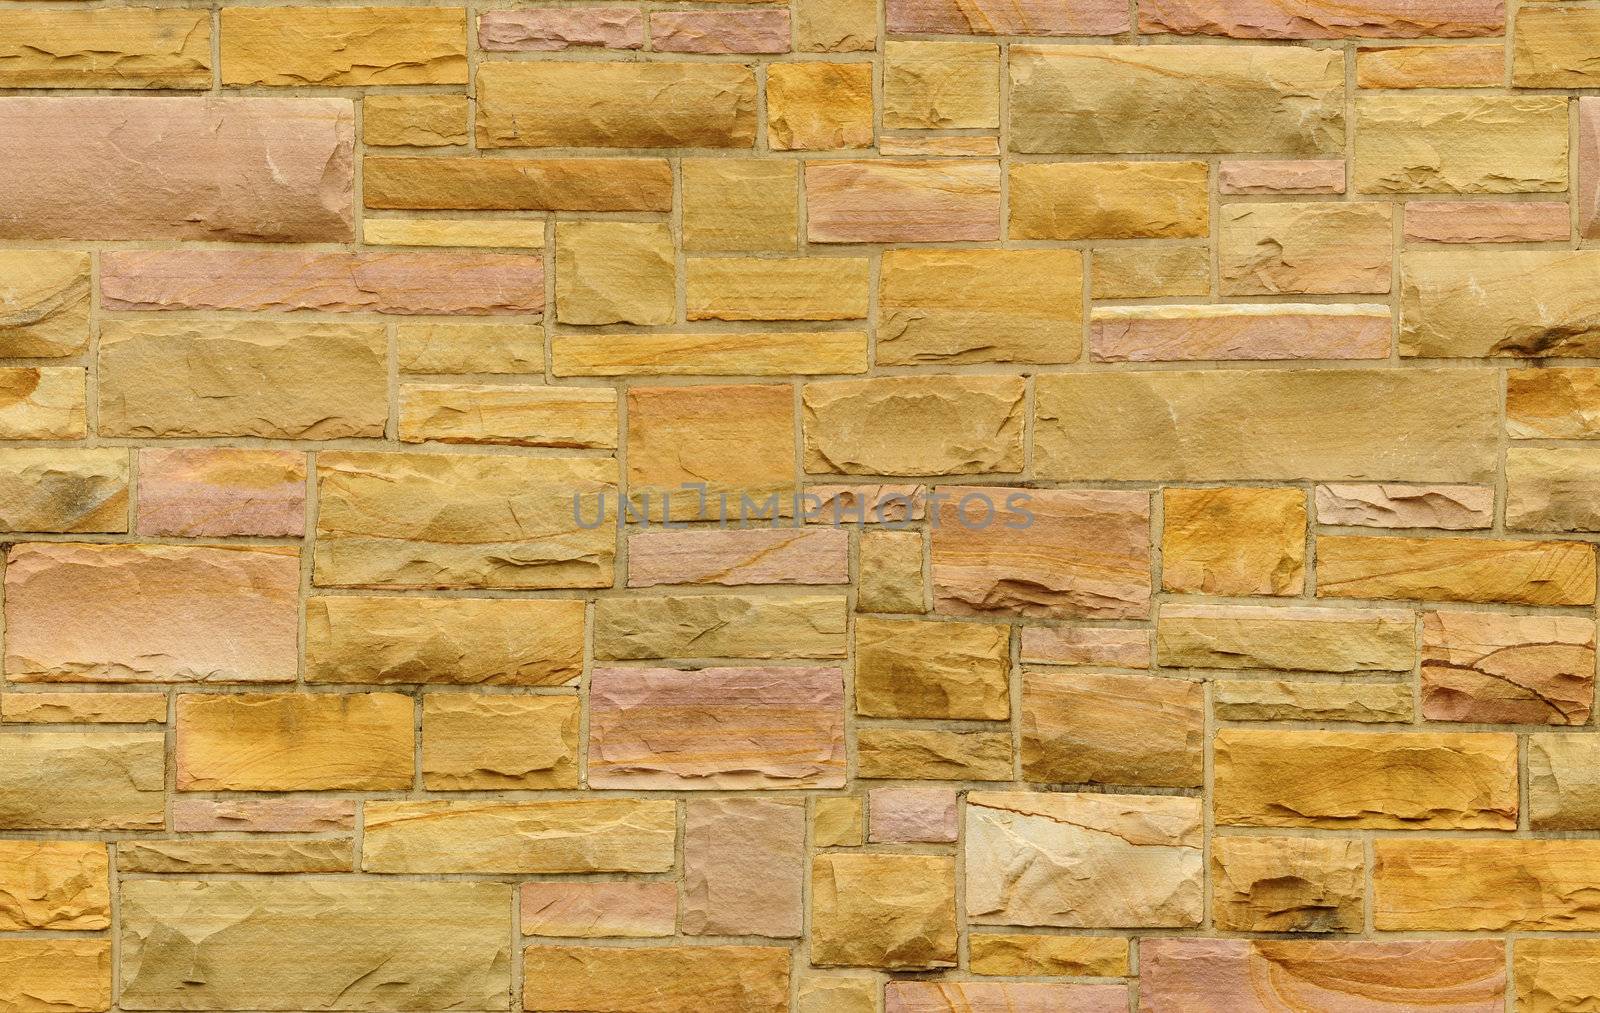 Seamless gold and pink masonry wall with irregular size rectangular stones. The texture repeats seamlessly both vertically and horizontally.